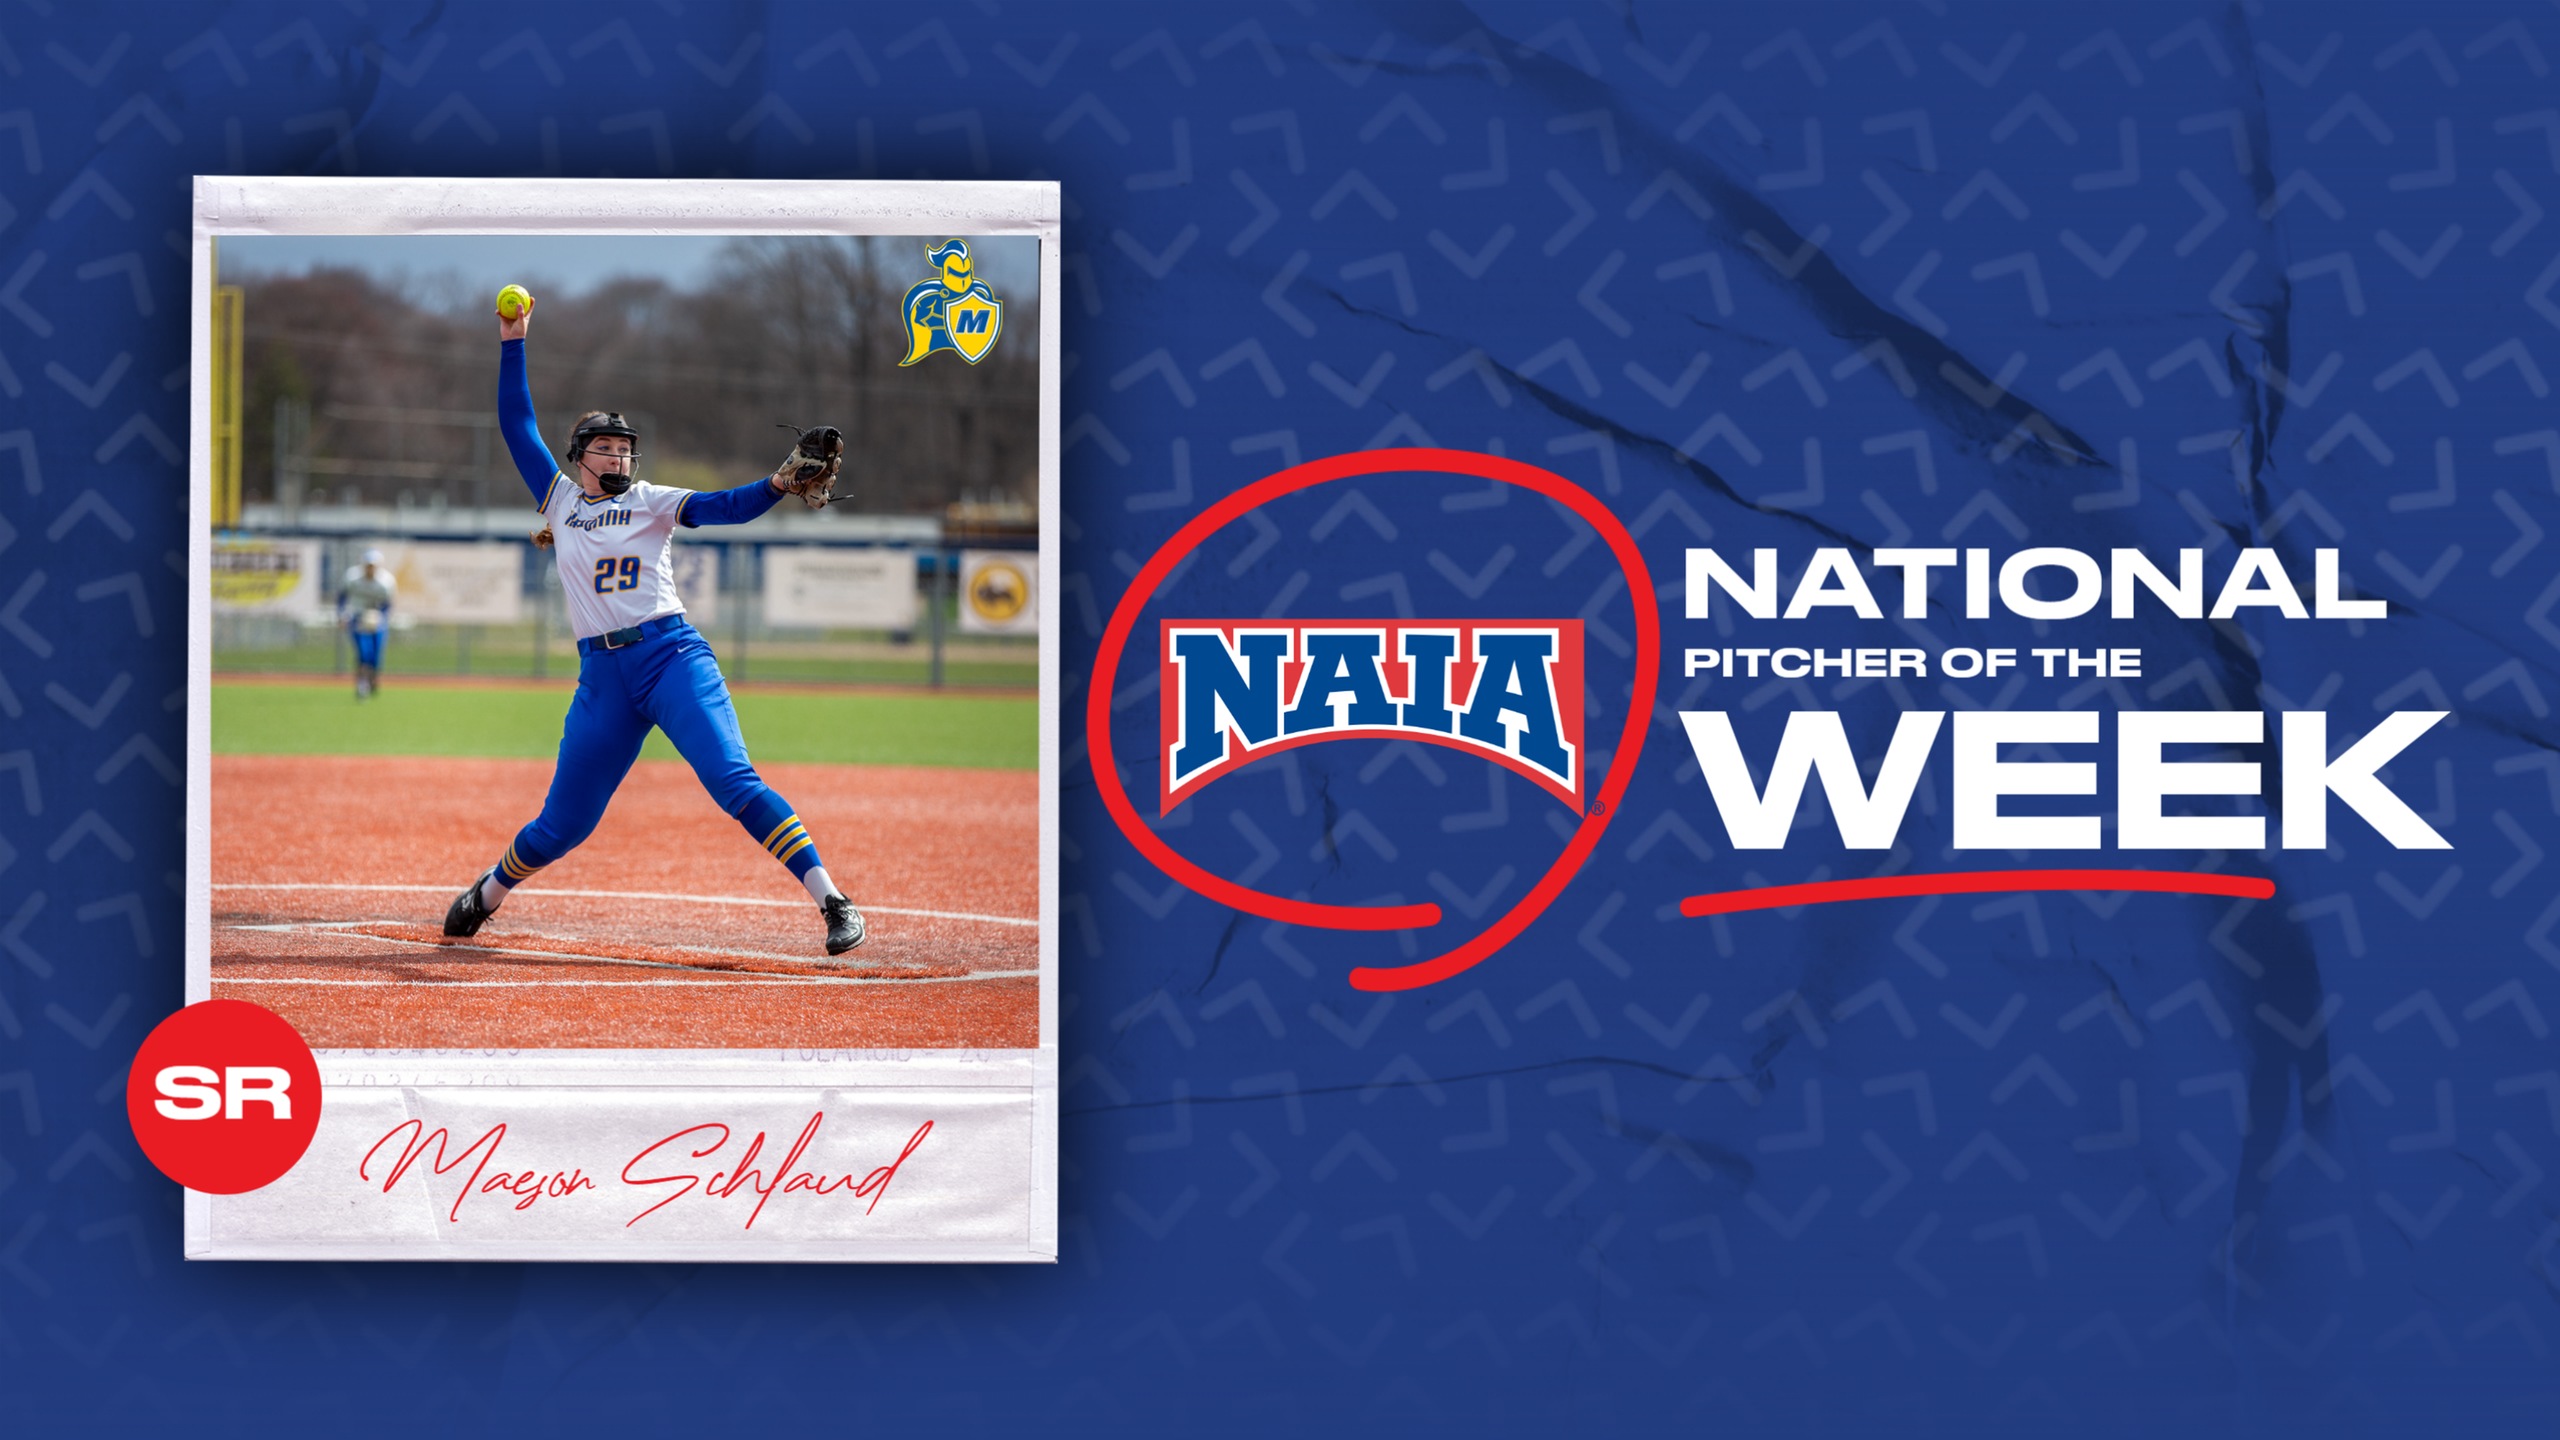 Madonna's Schlaud named NAIA National Pitcher of the Week